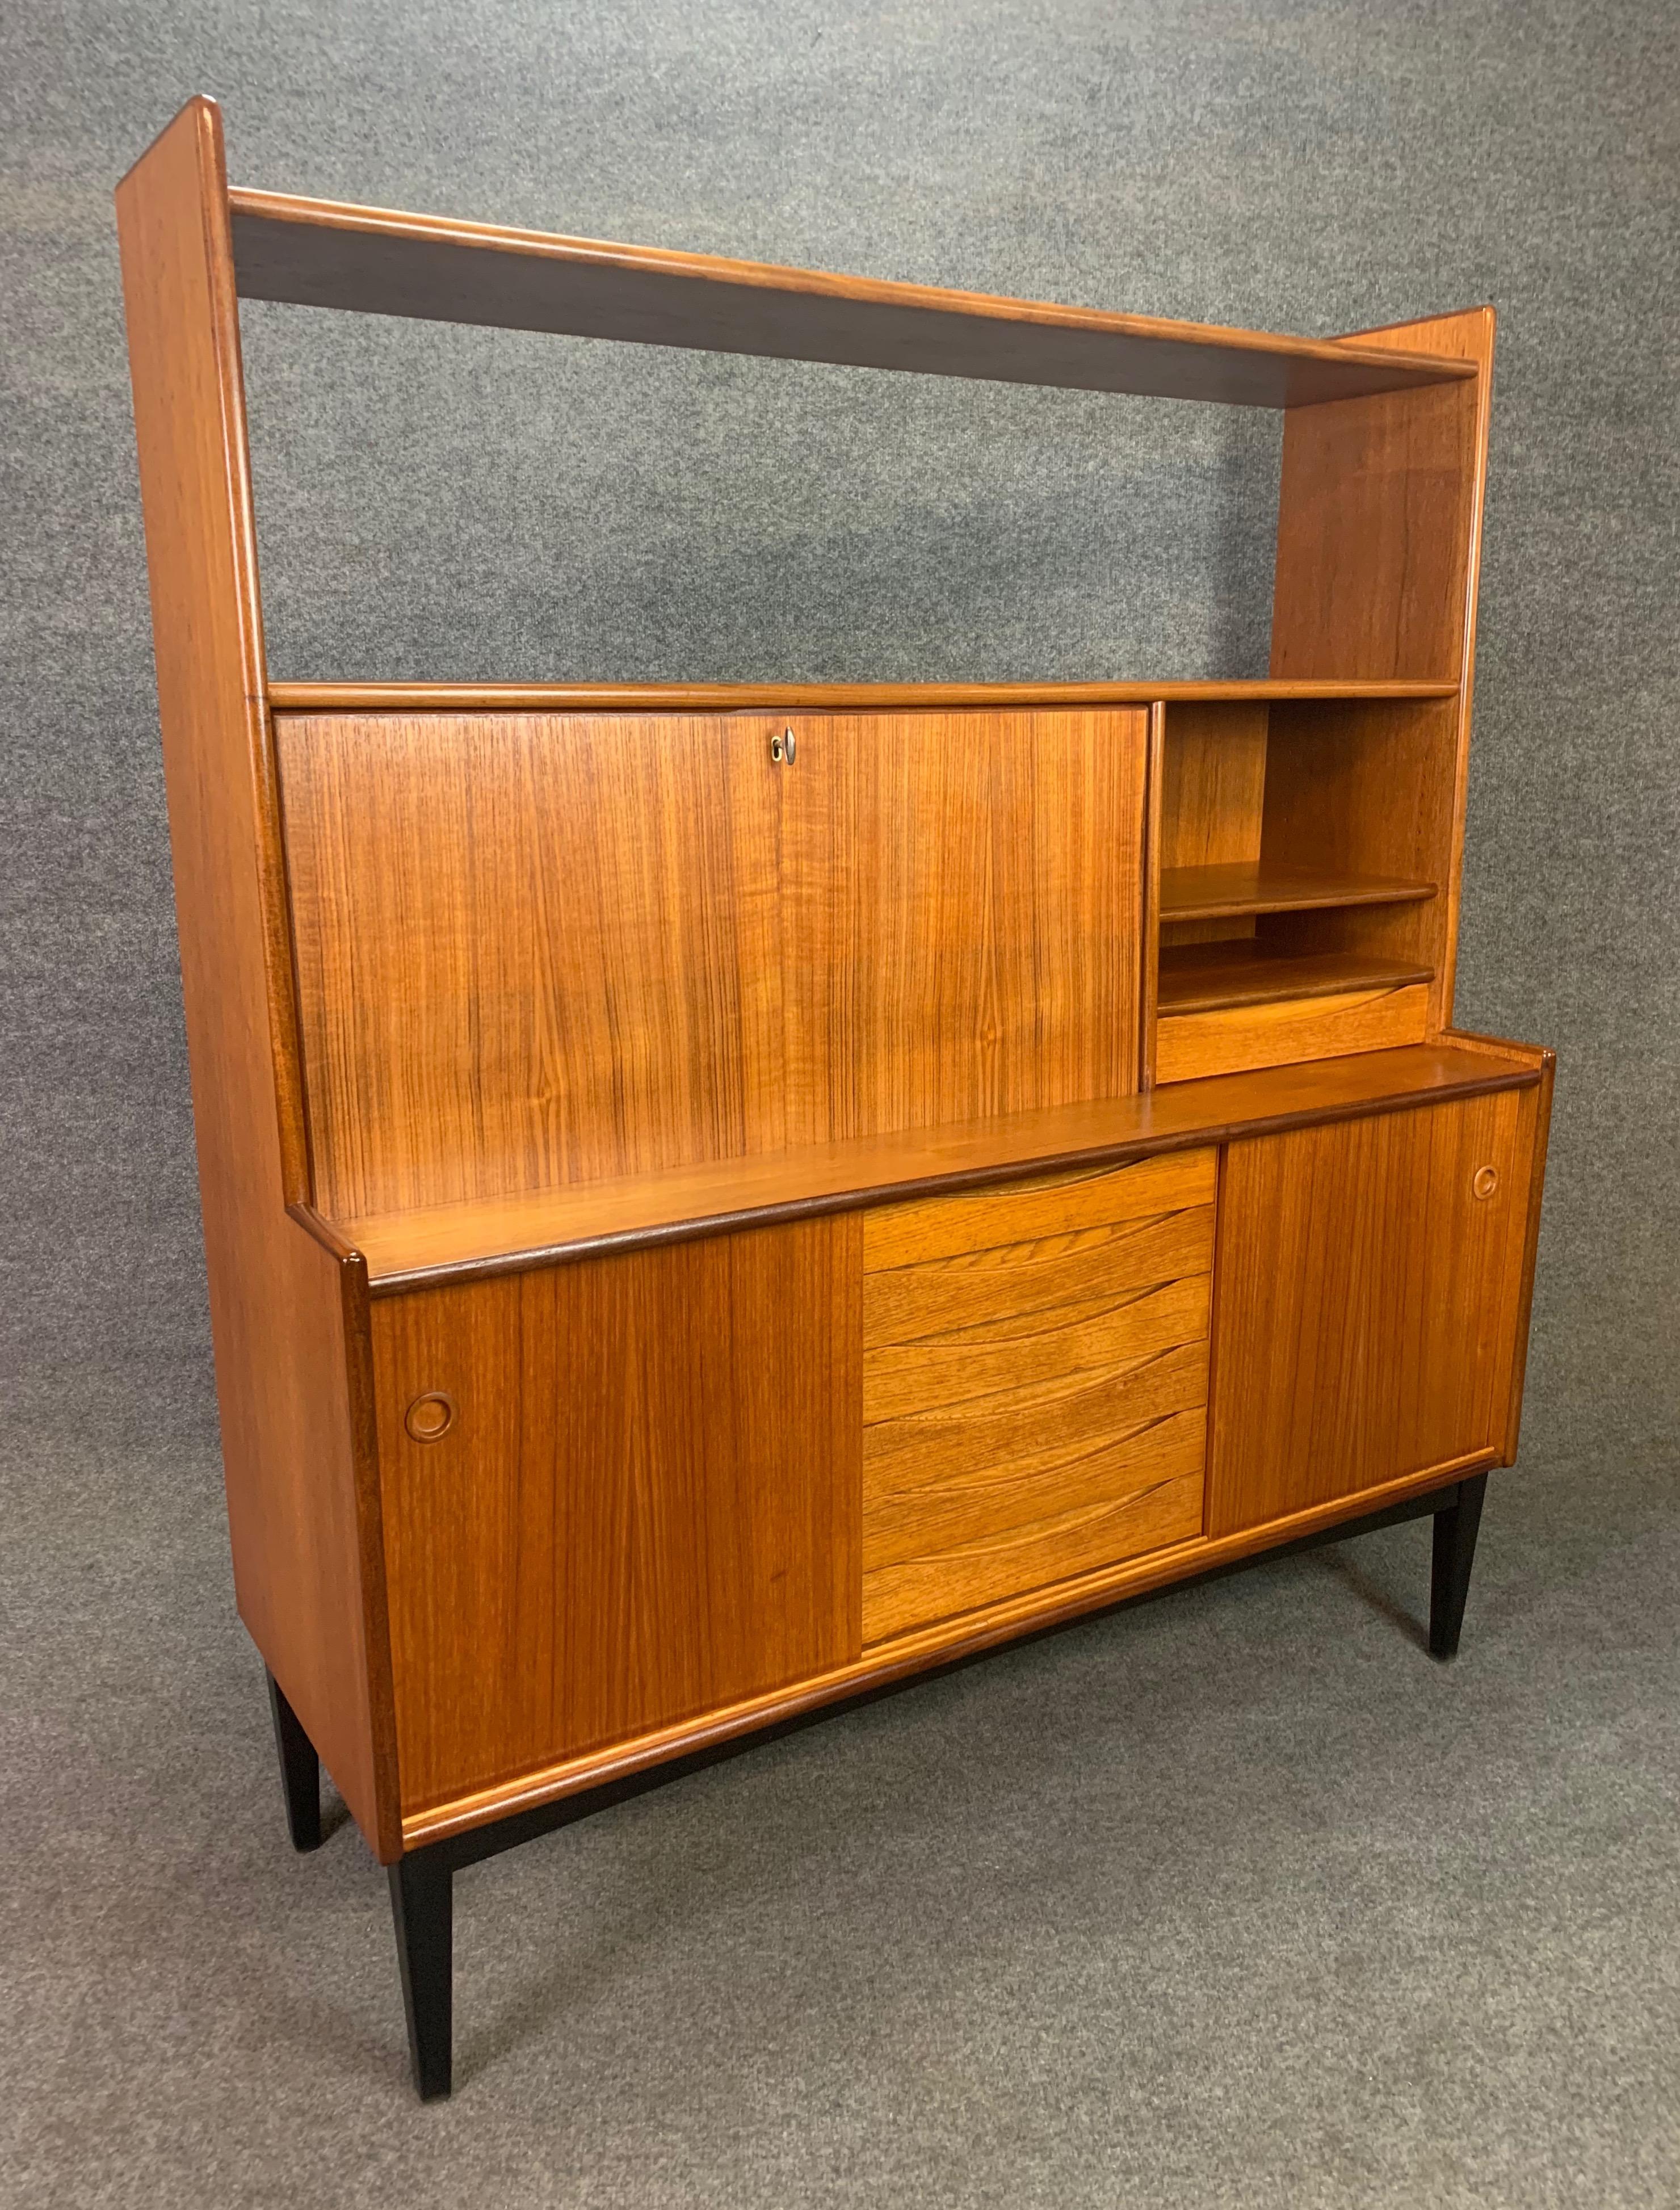 Here is a beautiful Scandinavian Modern hutch bookcase manufactured by Brantorps in Sweden in the 1960s.
This special case piece, recently imported to California before its refinishing, features a vibrant wood grain contrasting between teak and oak